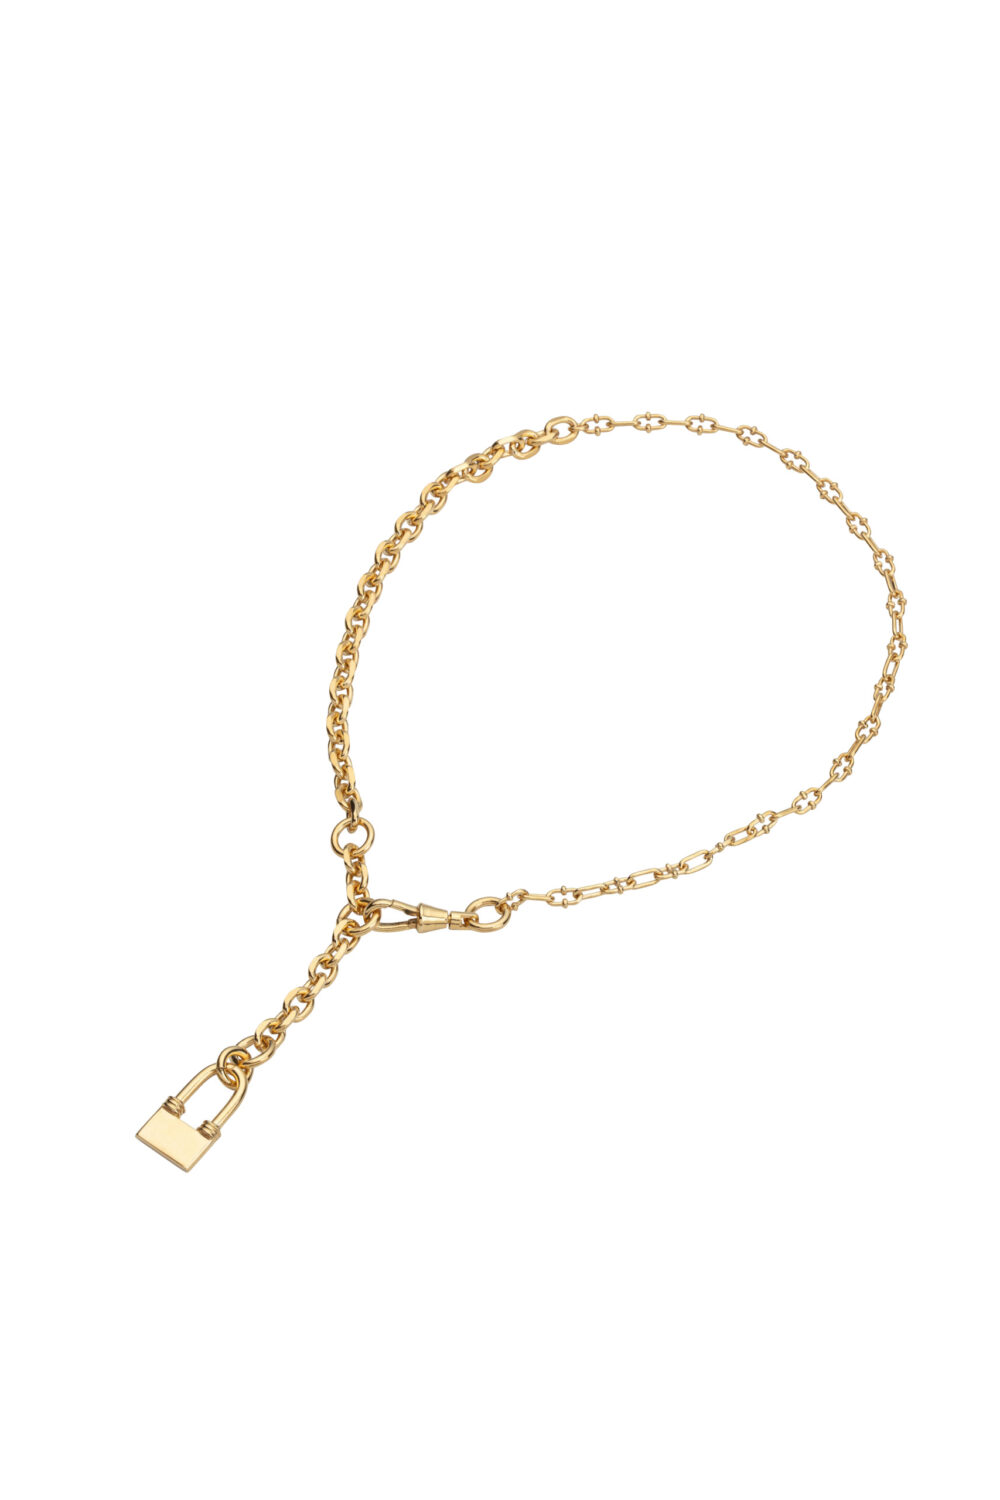 Ingent Necklace in gold